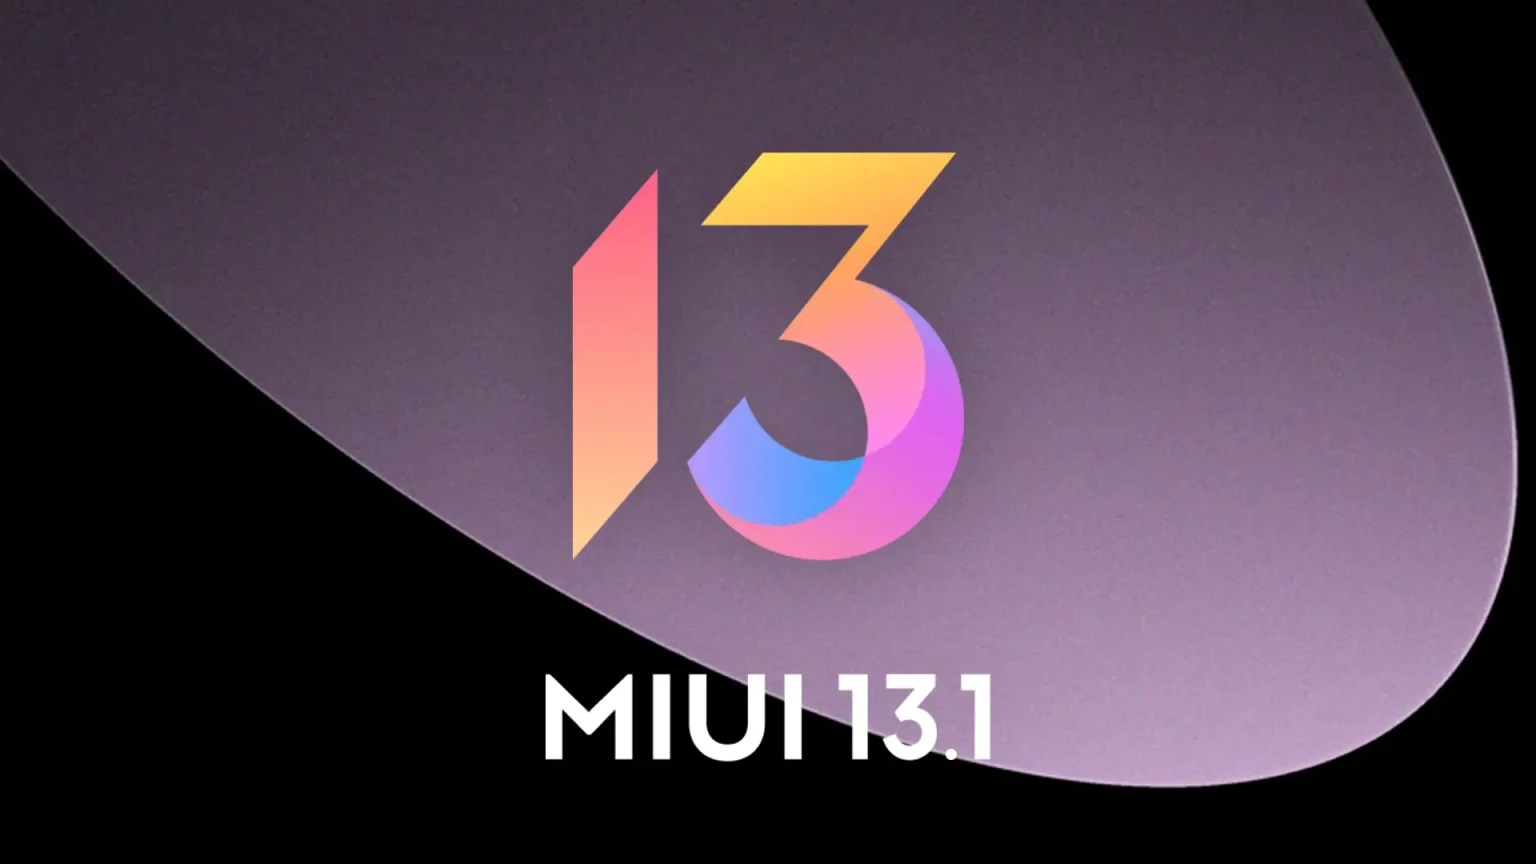 Surprise: Xiaomi has released a new version of MIUI, and it's not MIUI 13.5